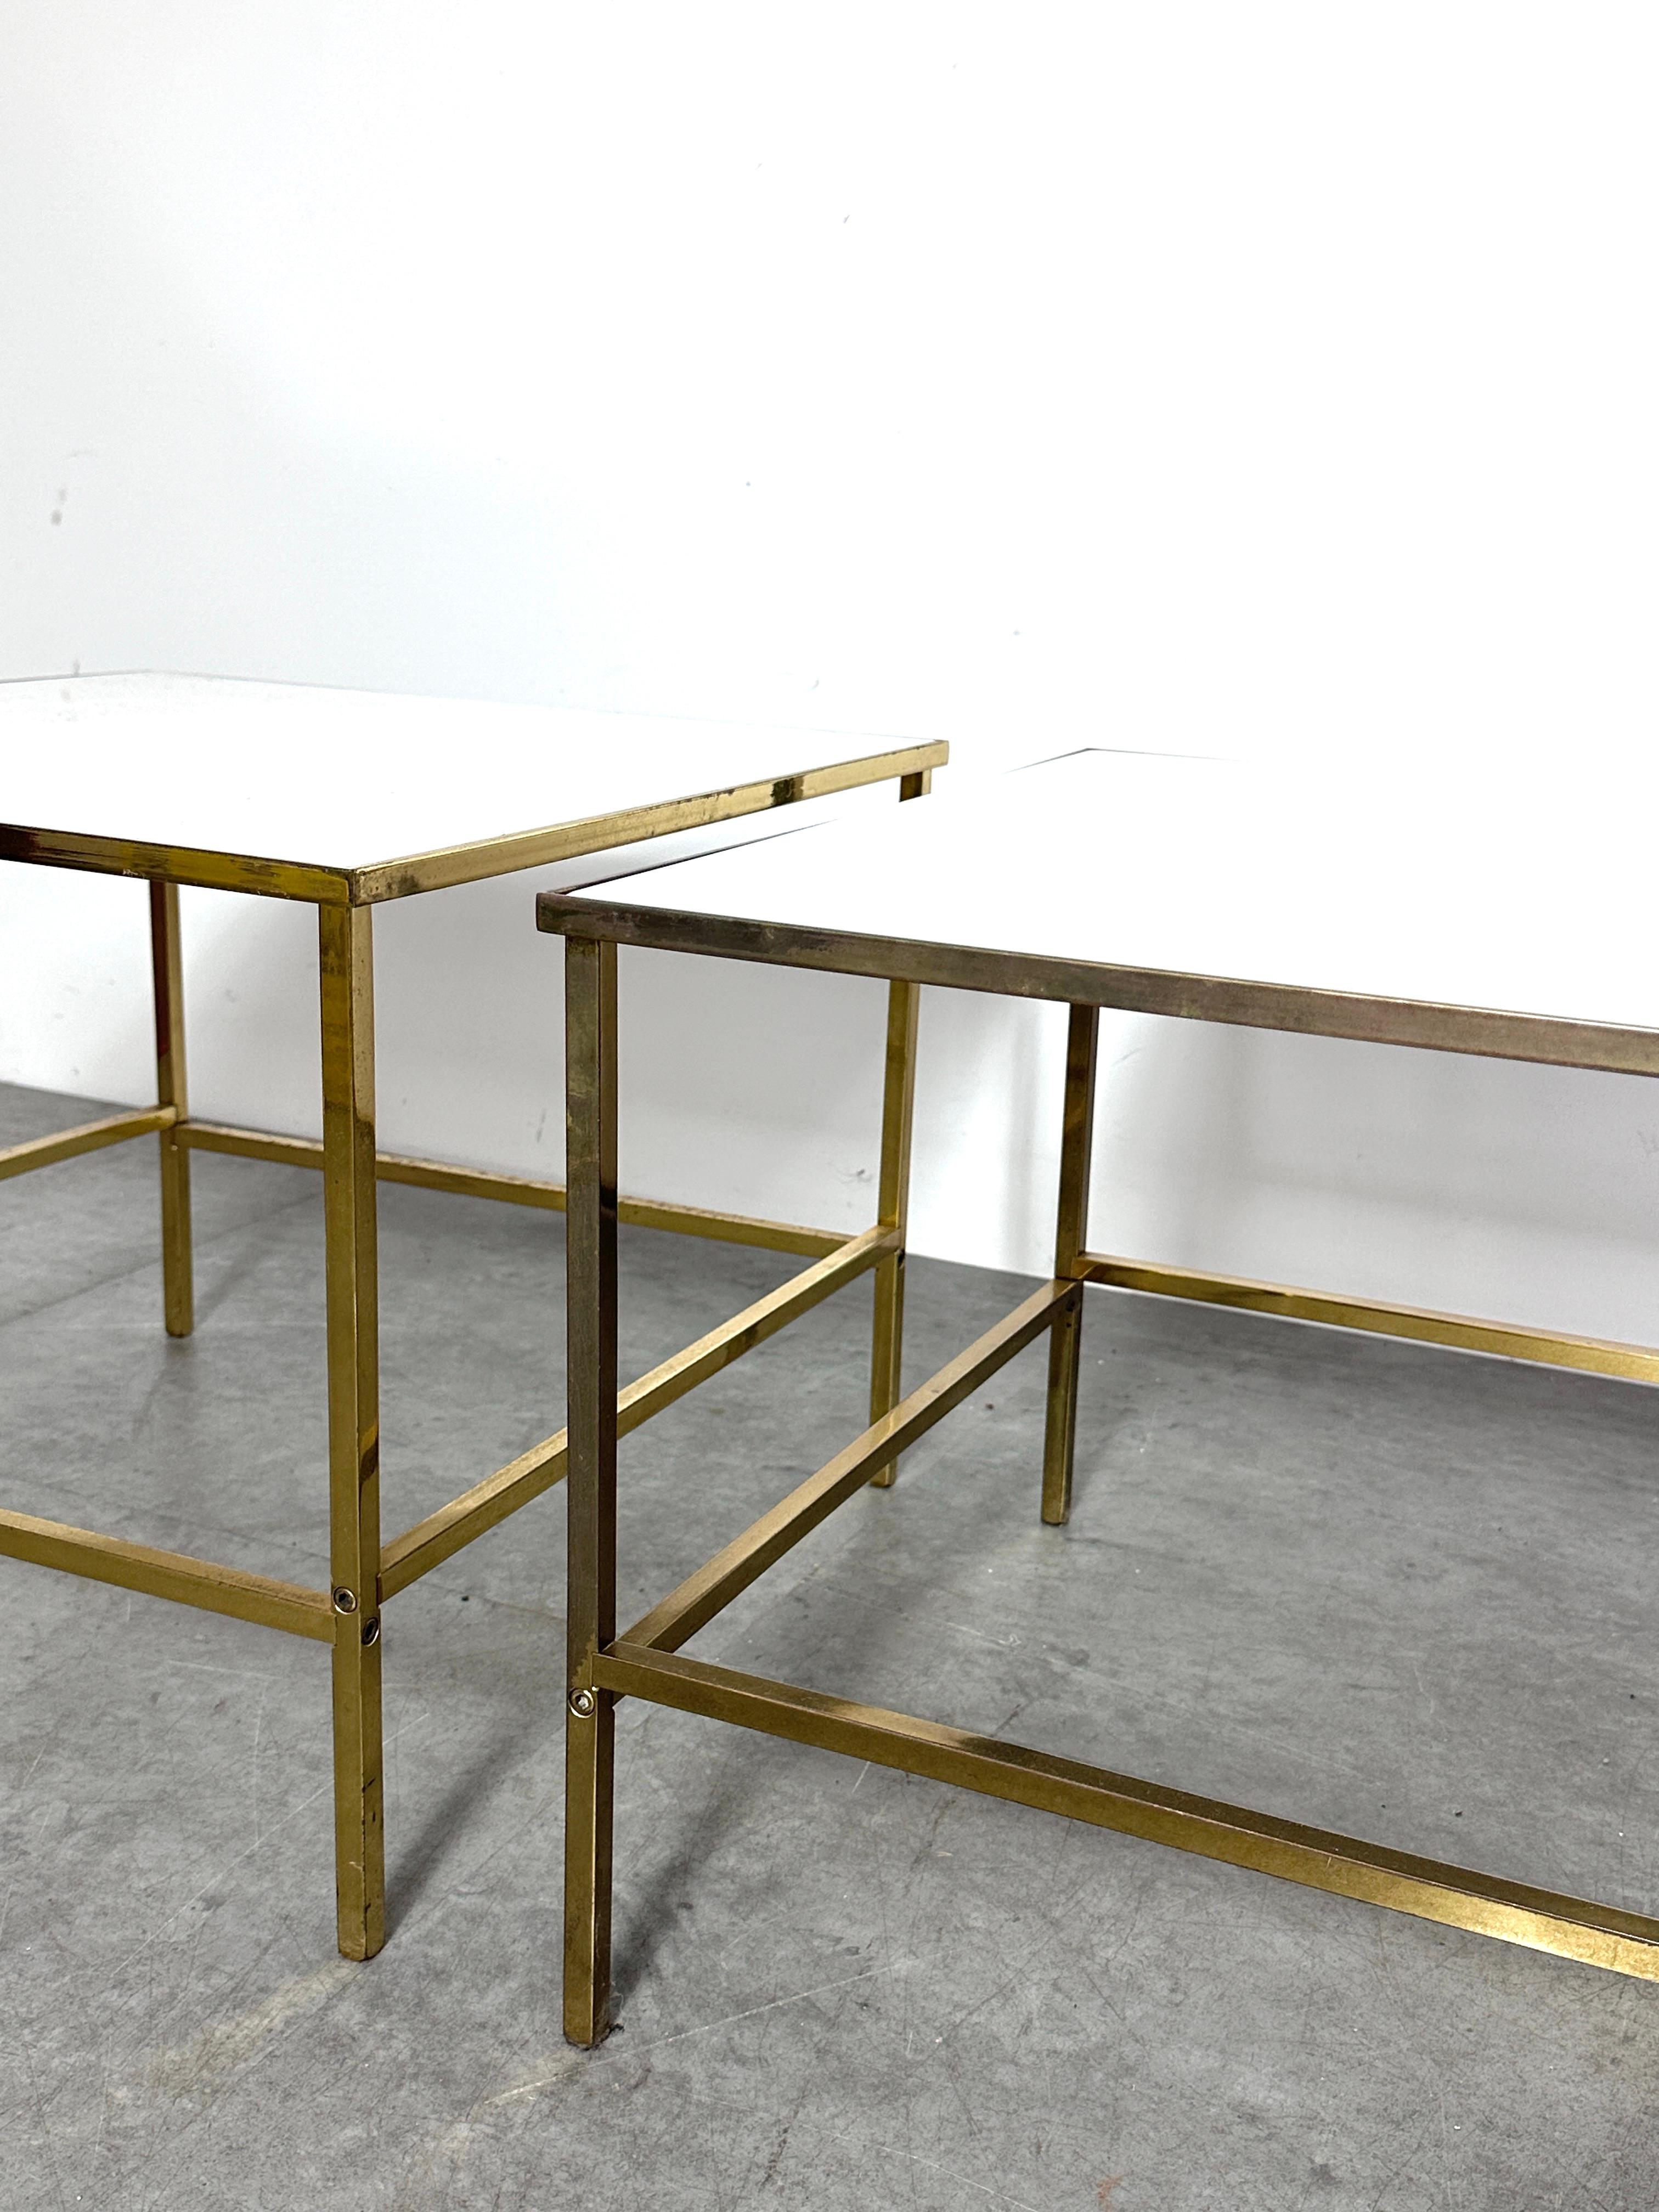 Three Brass & Vitrolite Square Side Tables by Harvey Probber 1950s Mid Century For Sale 6